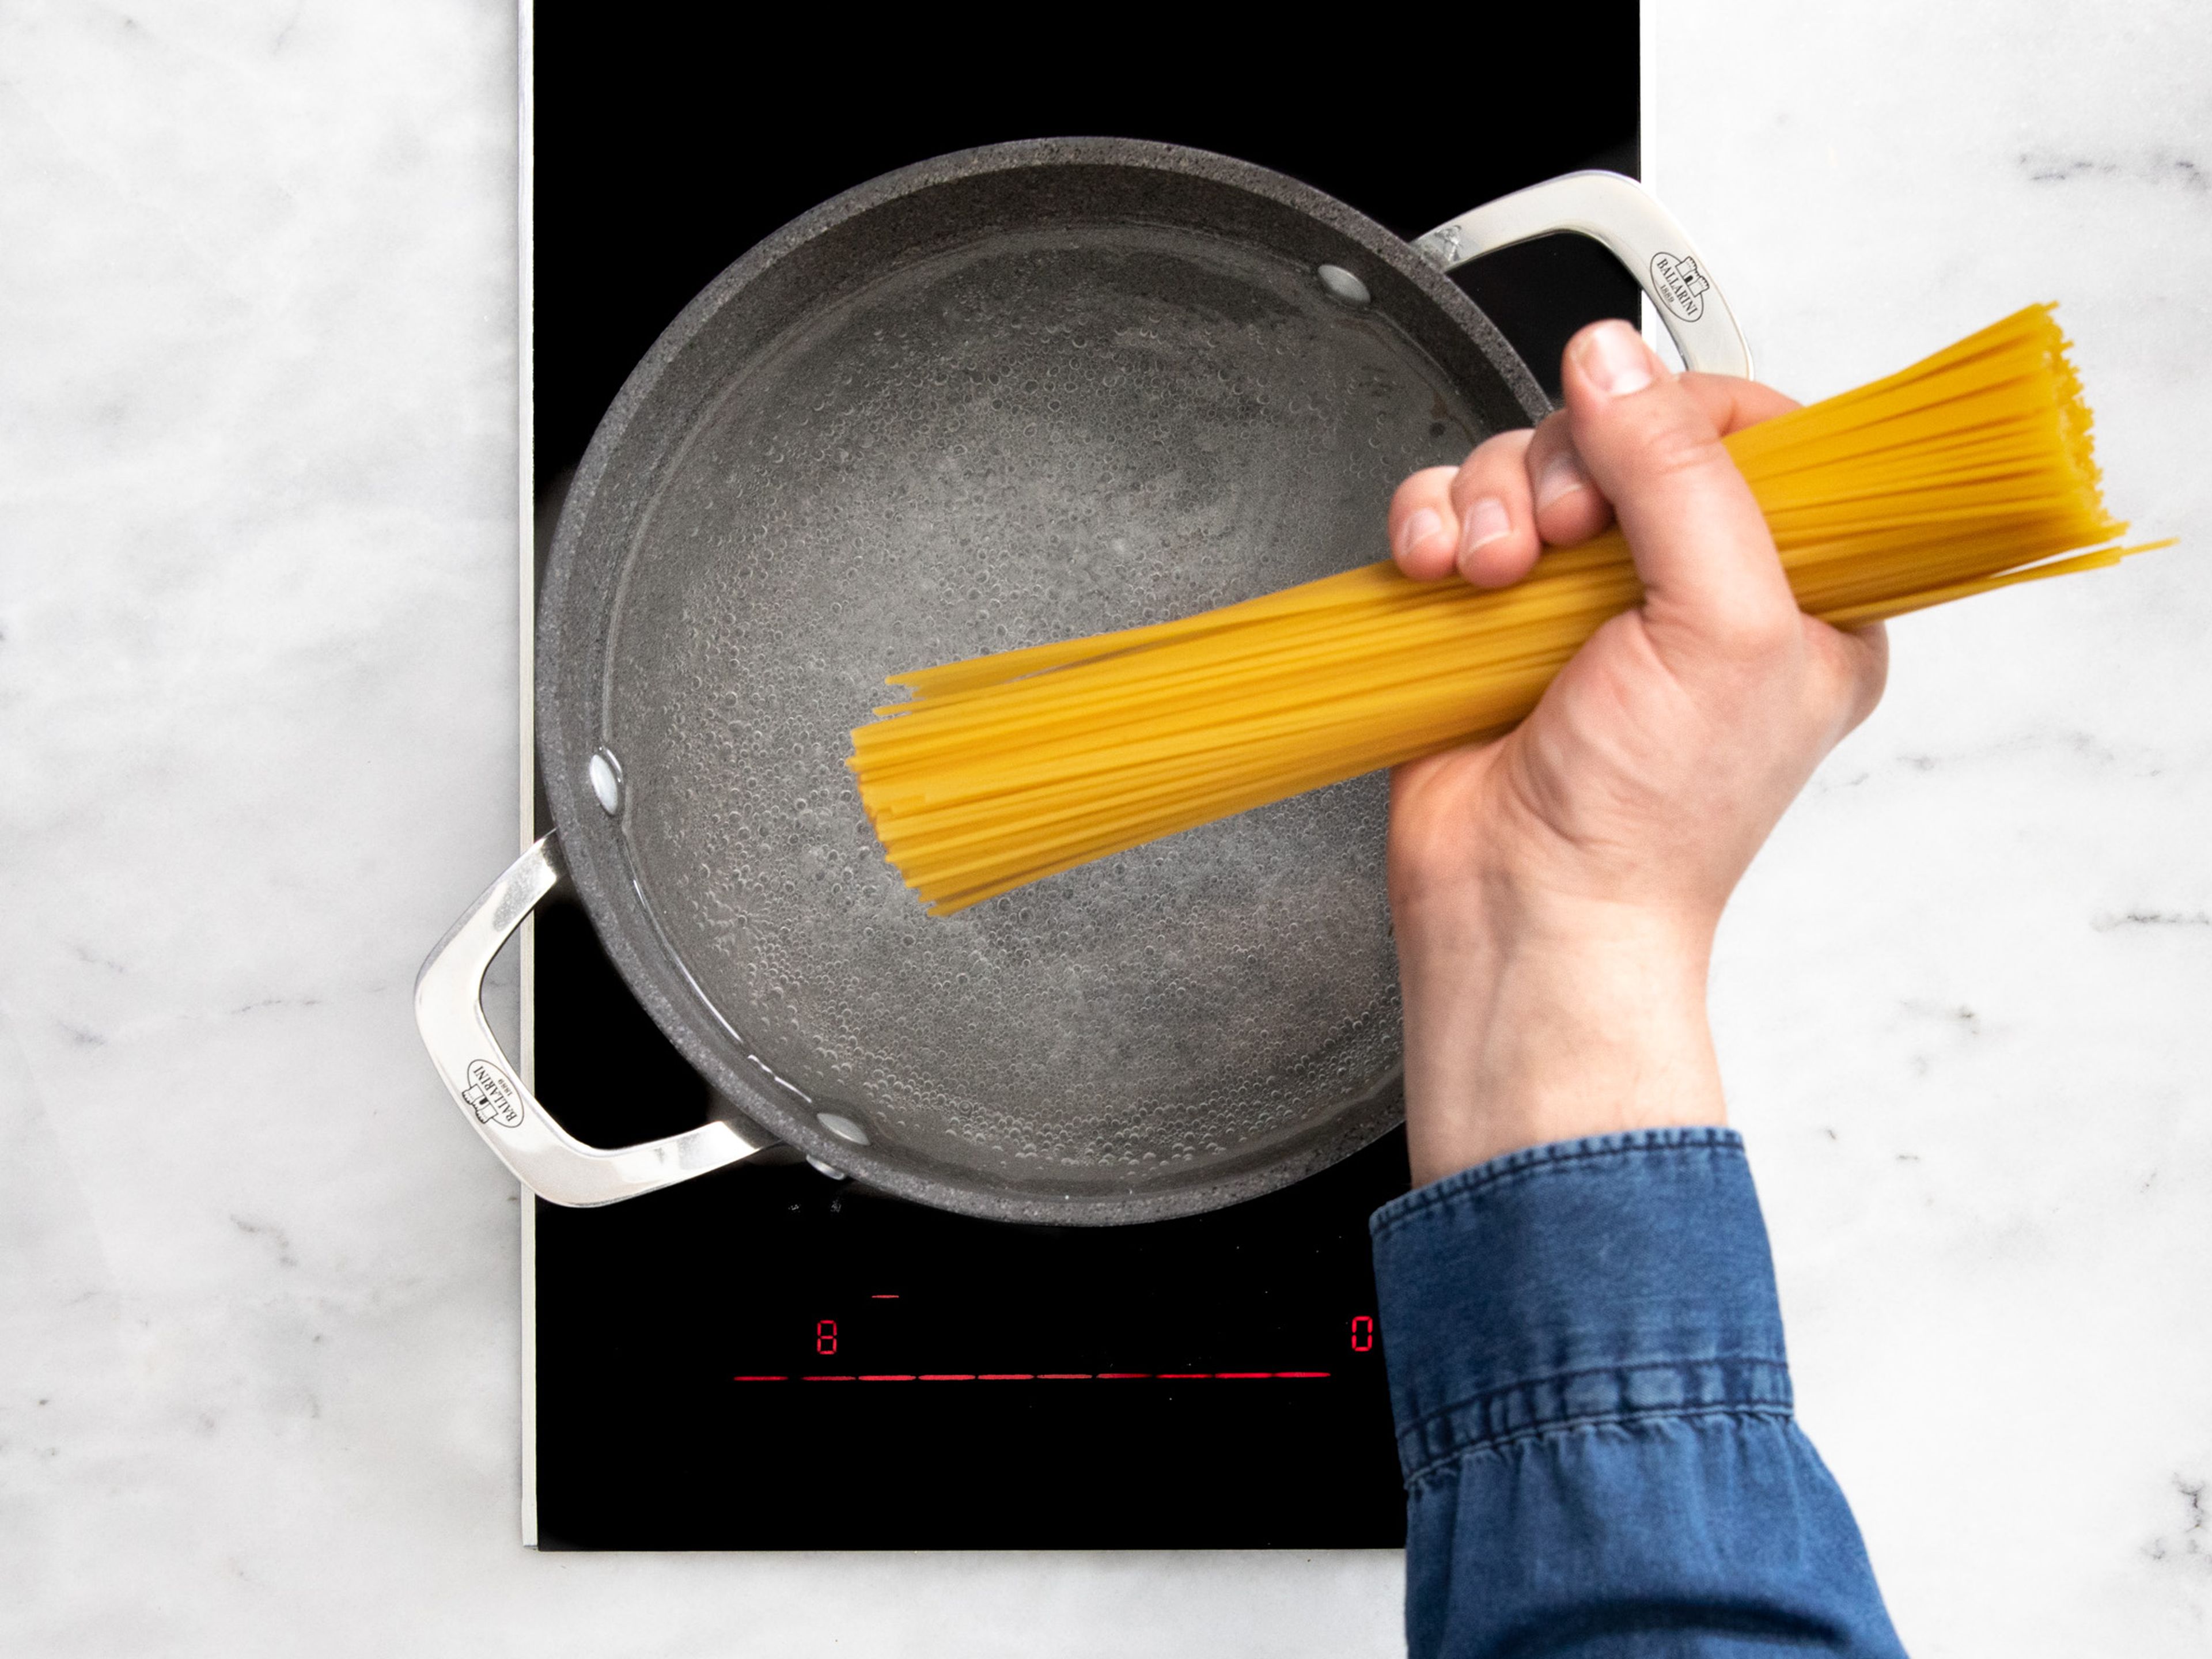 Heat up a large pot of water over medium-high heat. Once boiling, season with
salt and cook the pasta until al dente or according to the package instructions.